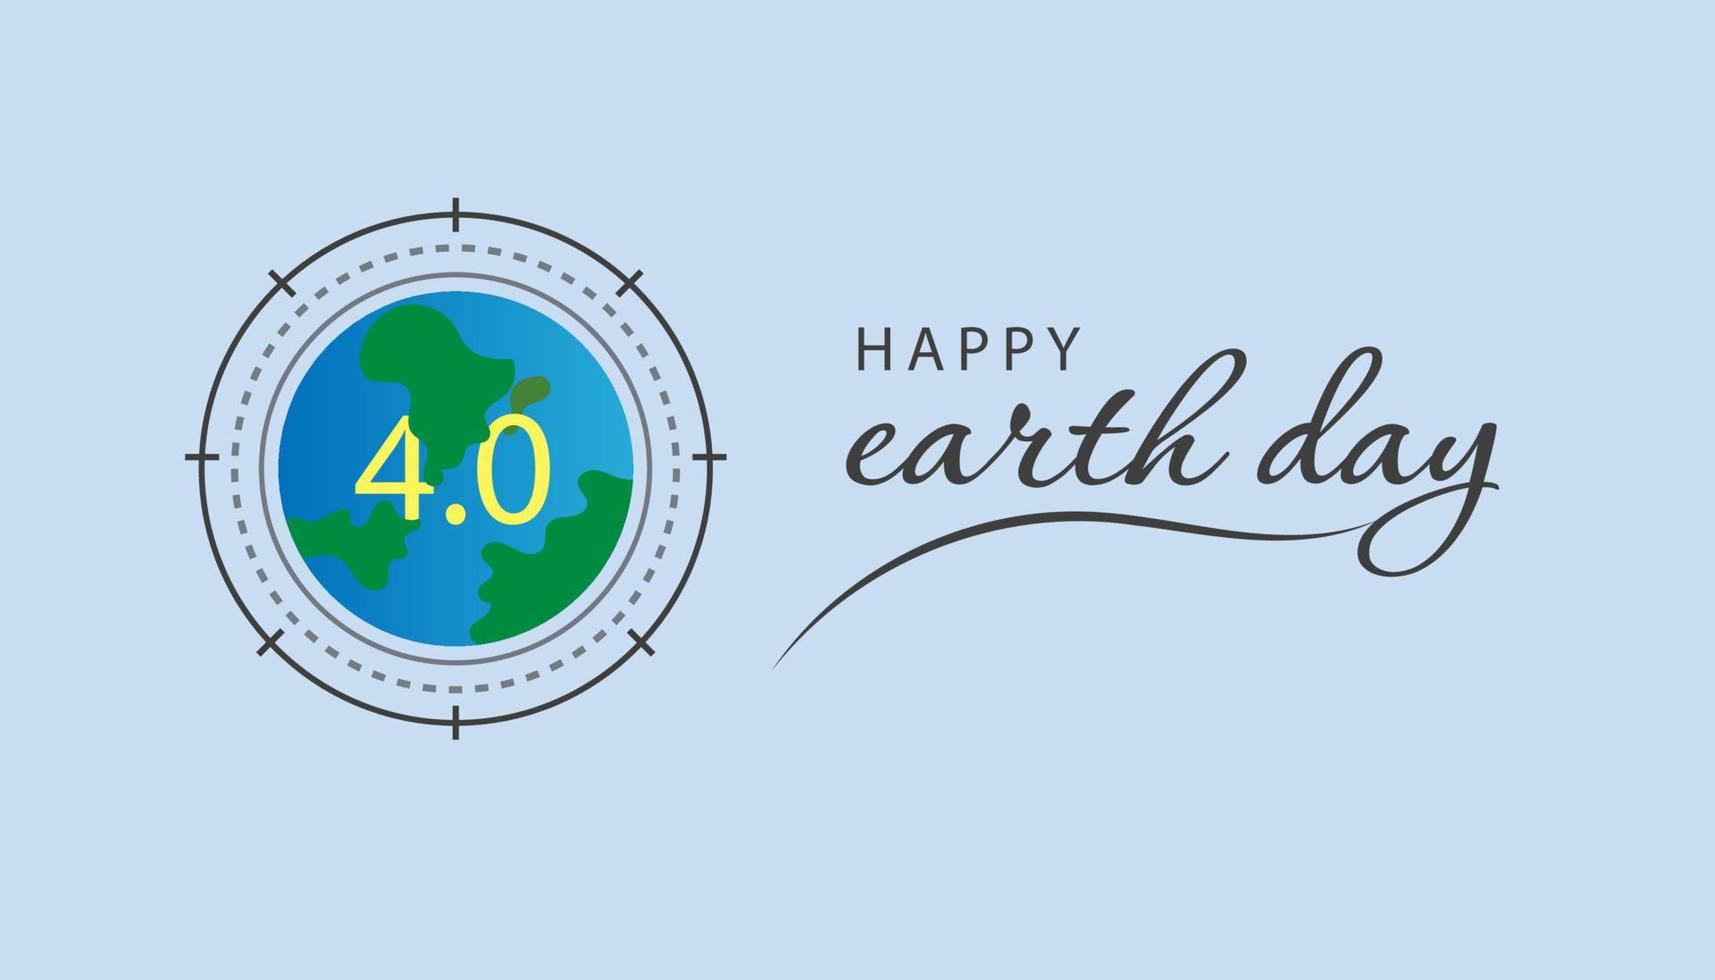 Happy Earth Day in industrial 4.0 style. illustration that the earth is entering the stage of industry 4.0 vector